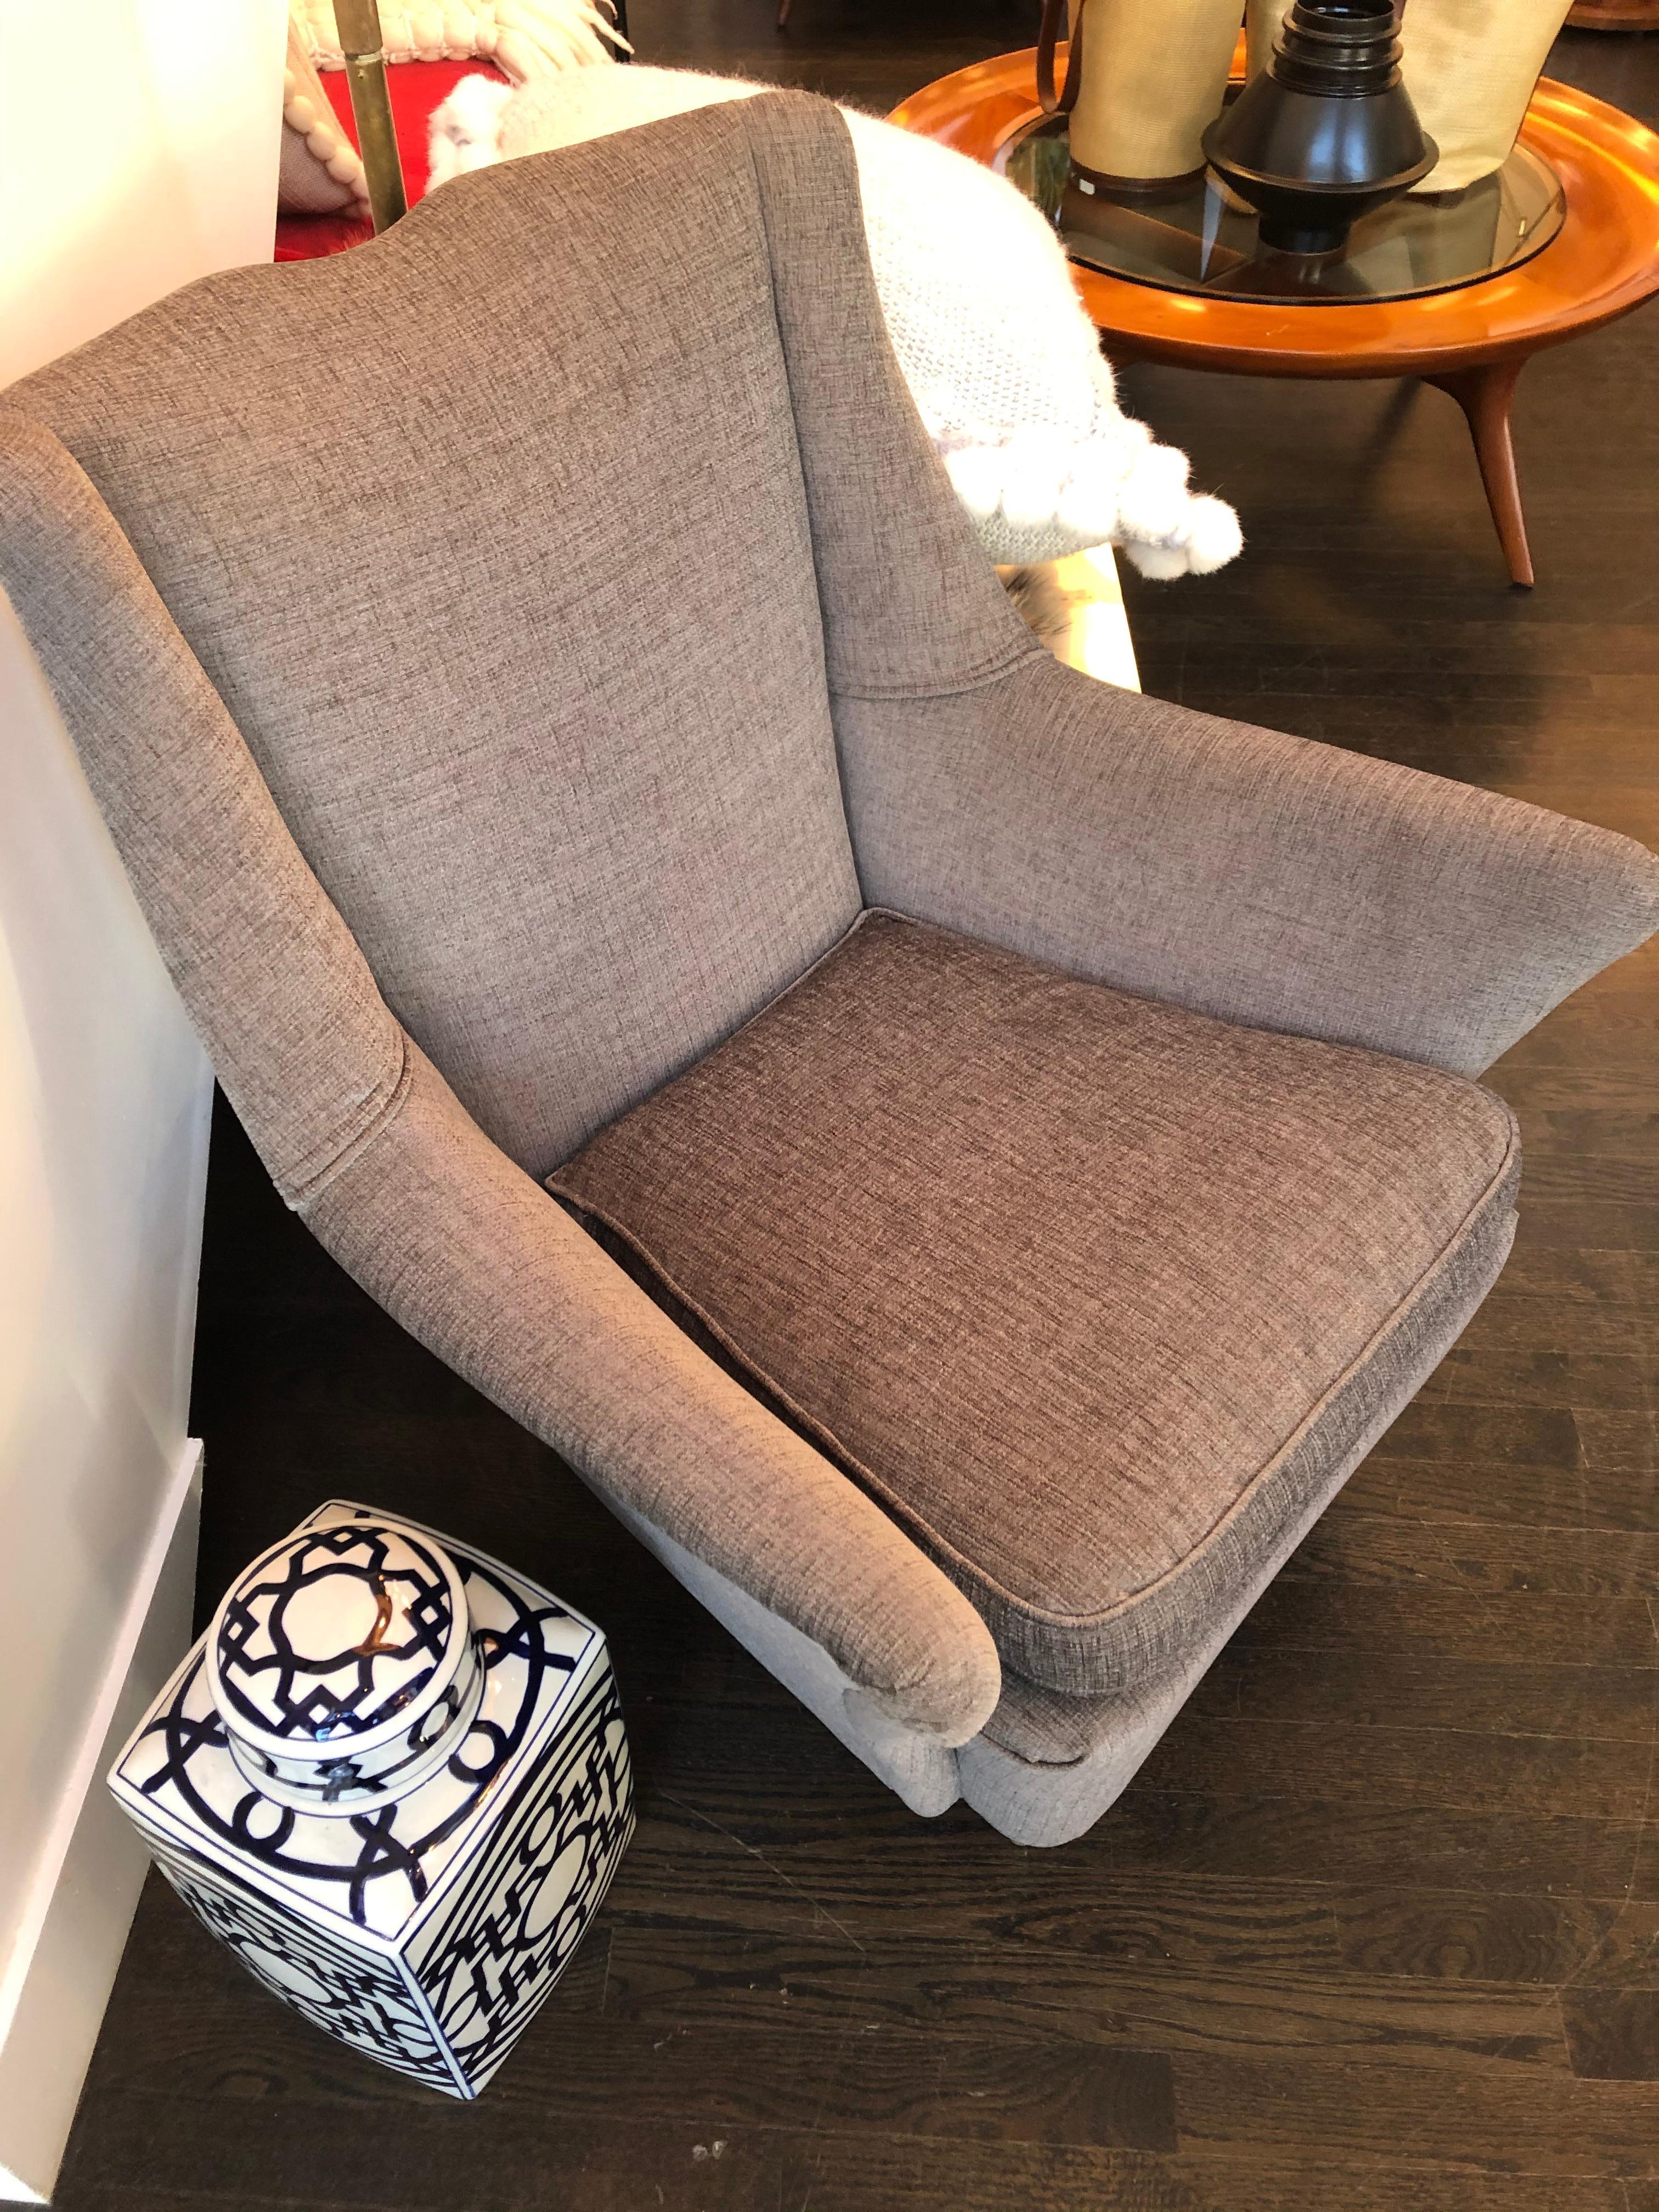 These handsome upholstered vintage Italian chairs have tight backs and loose seat cushions and are newly re-covered in a textured grey linen fabric.  The splayed arm details, notched detail on center of chair backs and the straight wooden front legs